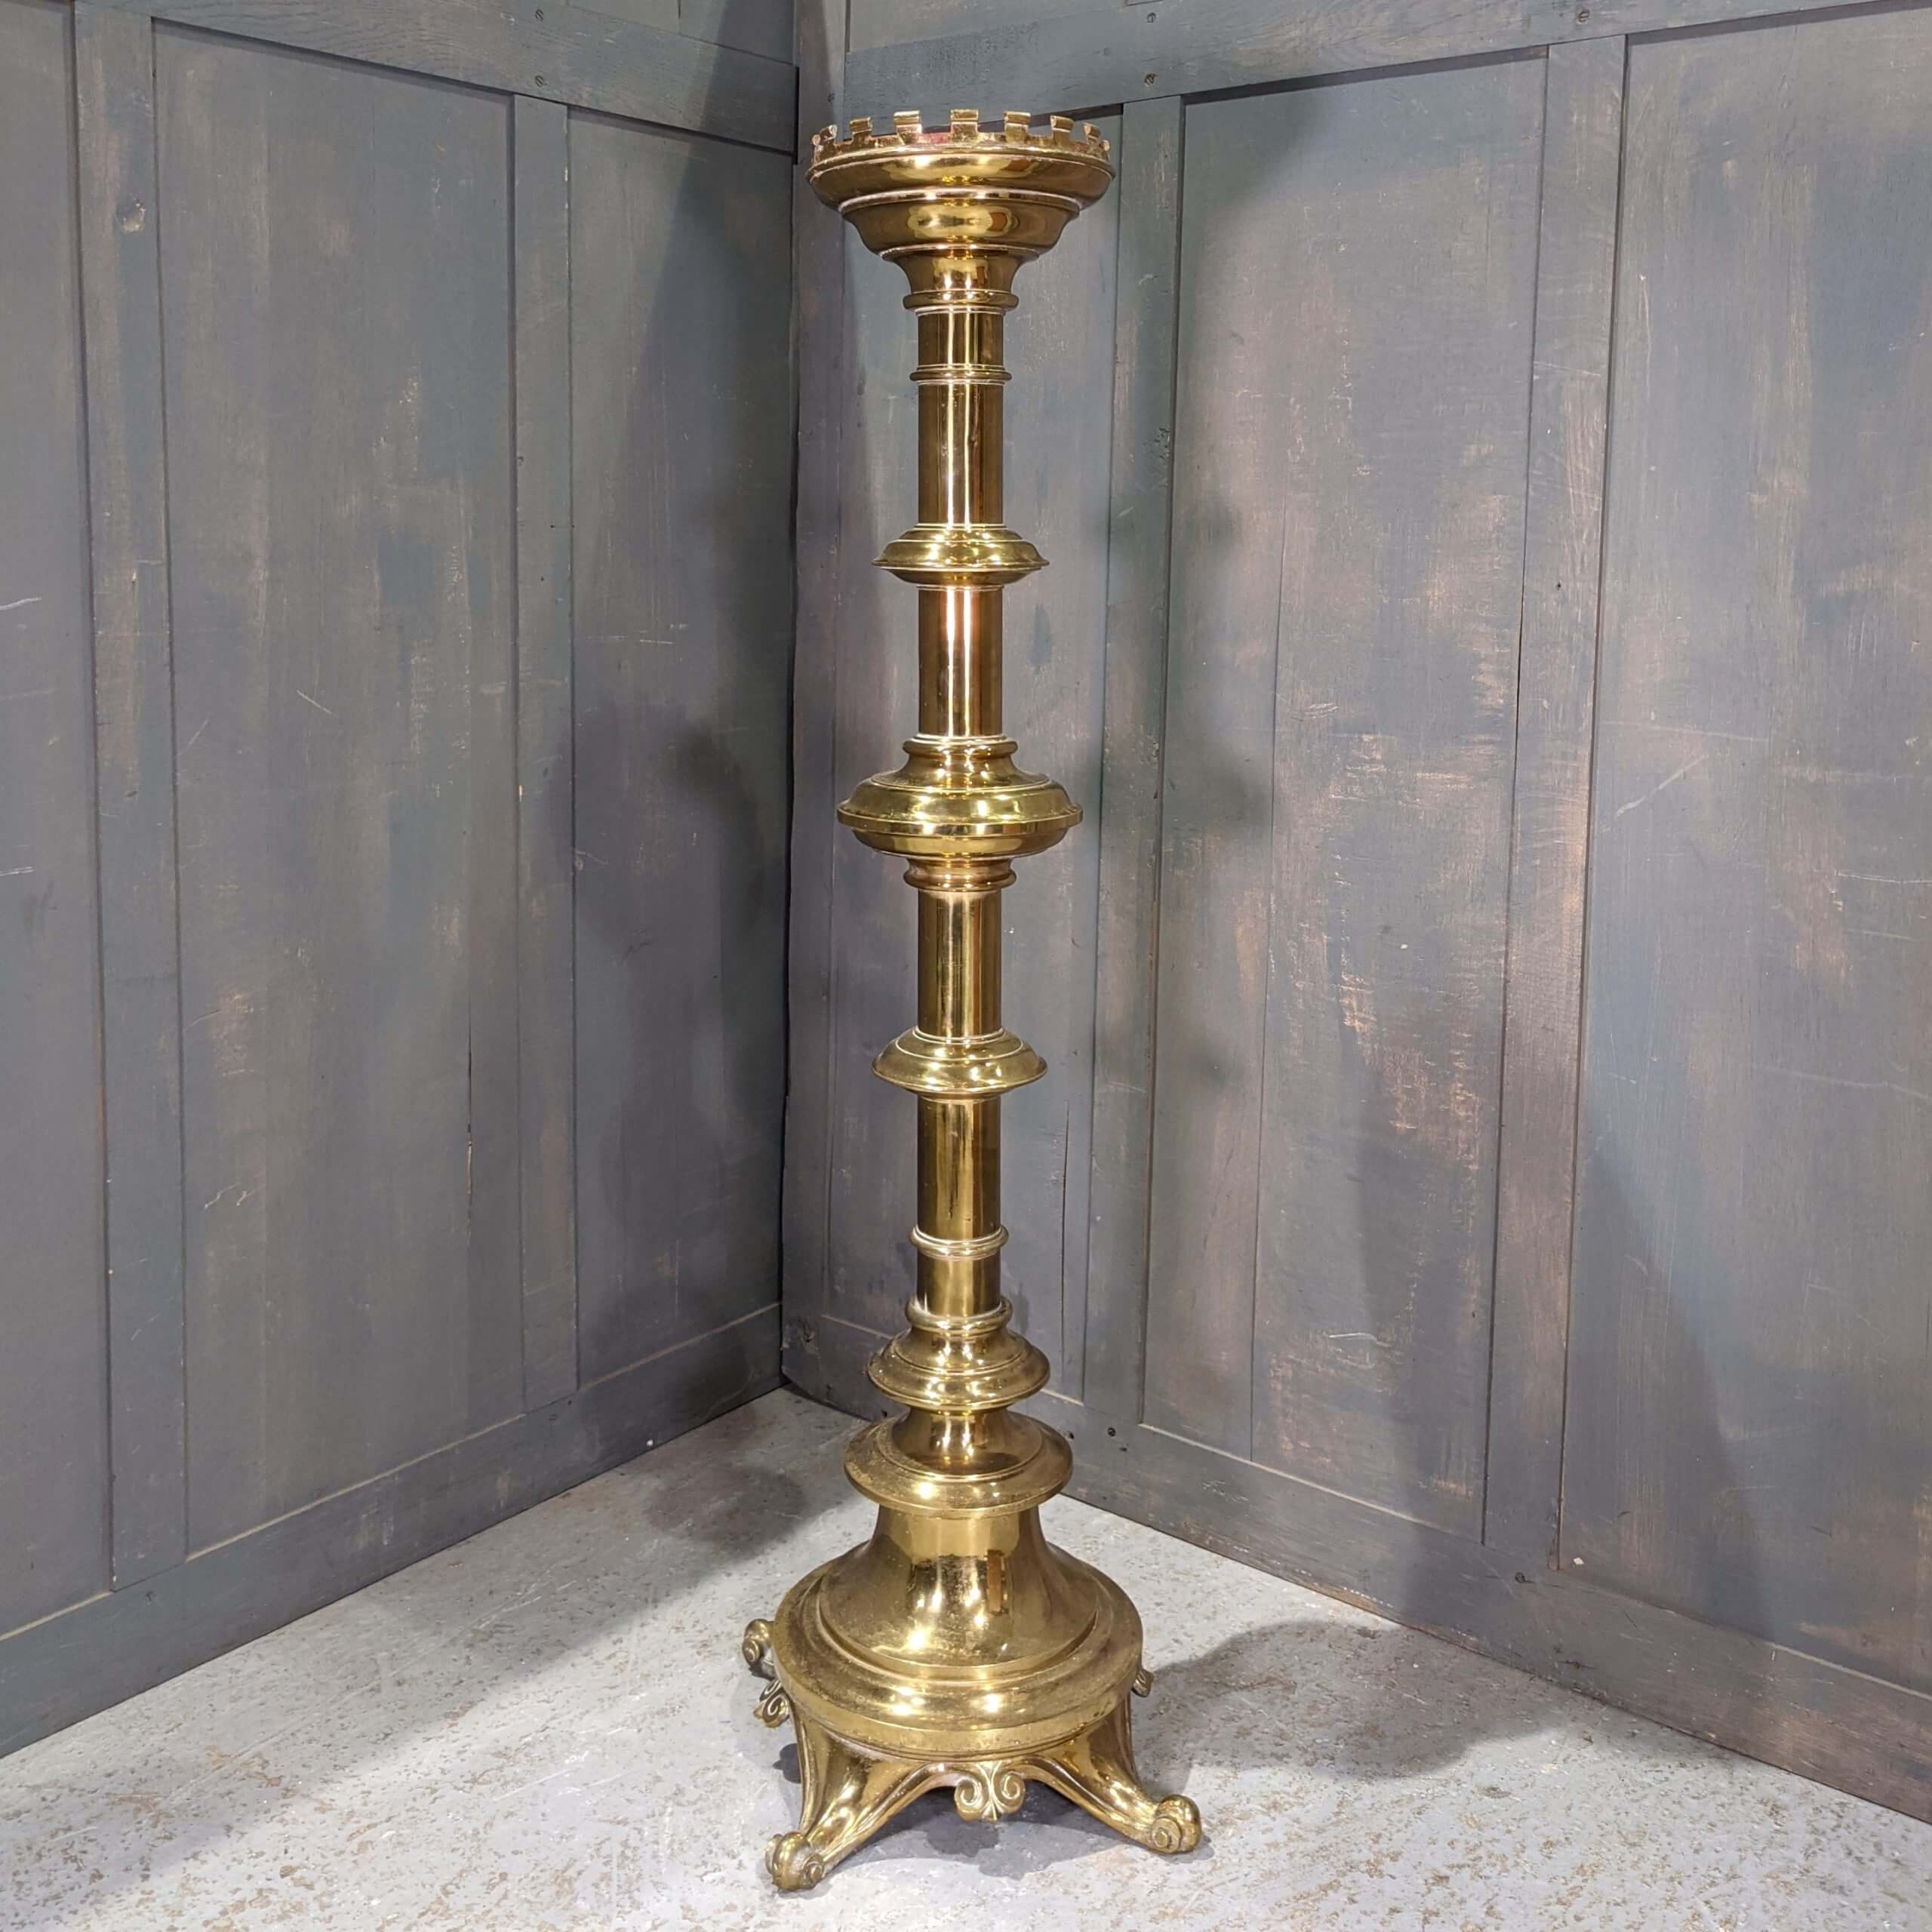 Very Fine Antique Extra Large Heavy Brass Church Paschal Candlestand  Candlestick (SOLD) - Antique Church Furnishings